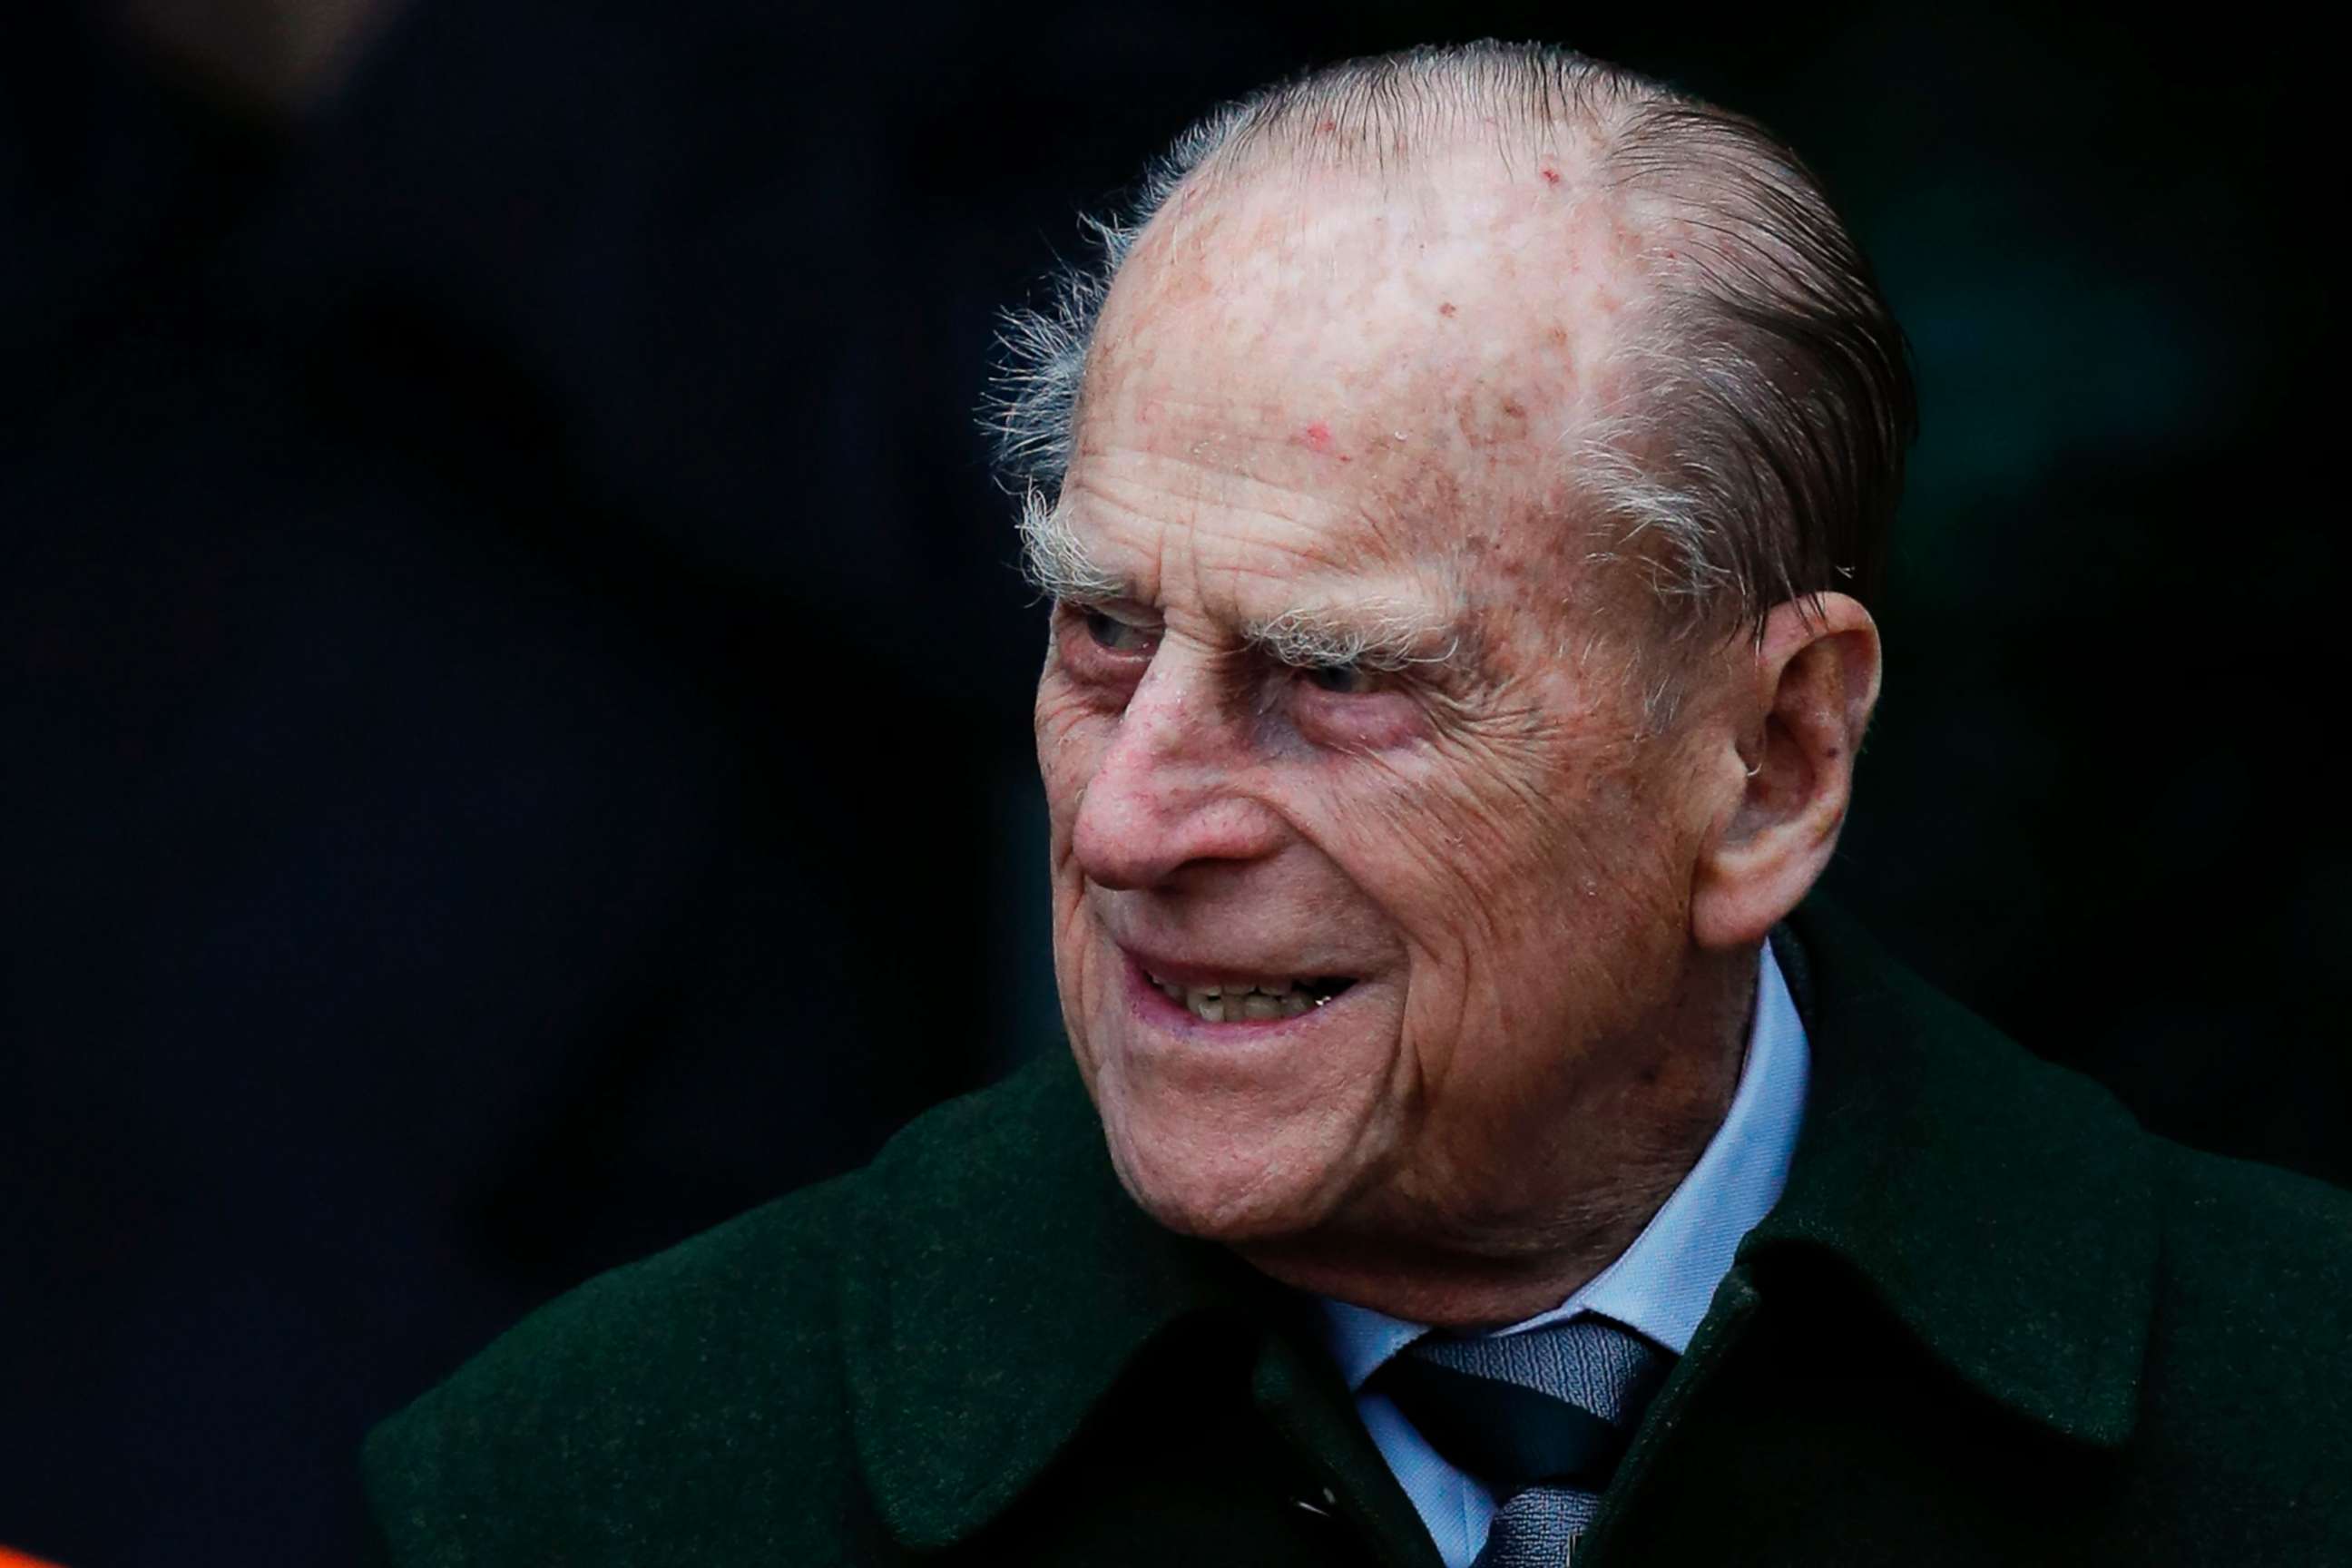 PHOTO: Britain's Prince Philip, Duke of Edinburgh leaves after attending Royal Family's traditional Christmas Day church service at St Mary Magdalene Church in Sandringham, England, Dec. 25, 2017.